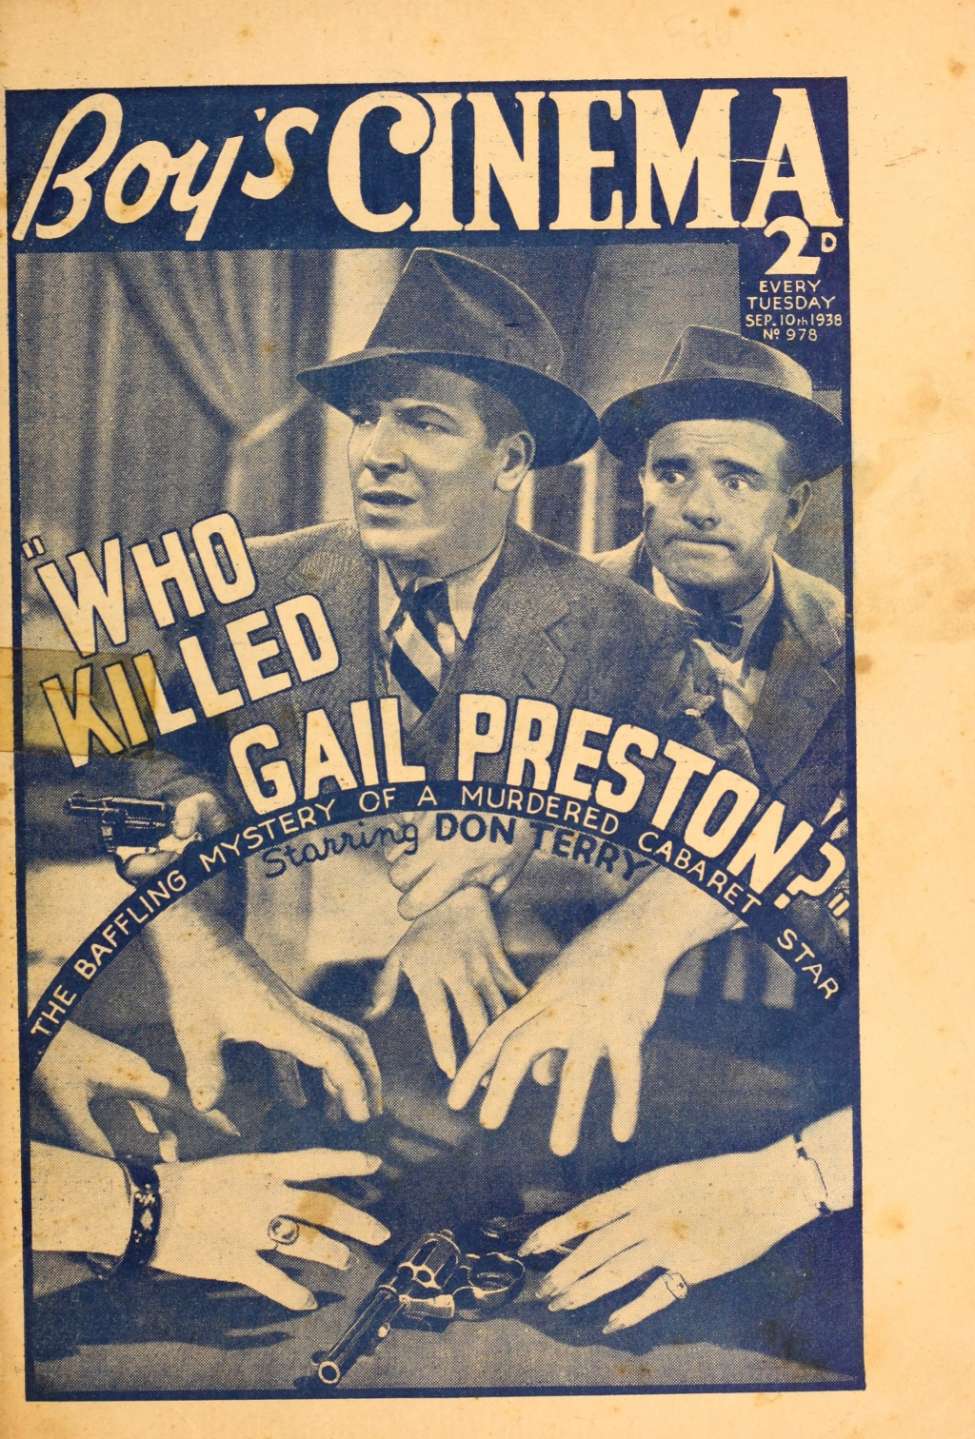 Book Cover For Boy's Cinema 978 - Who Killed Gail Preston - Don Terry